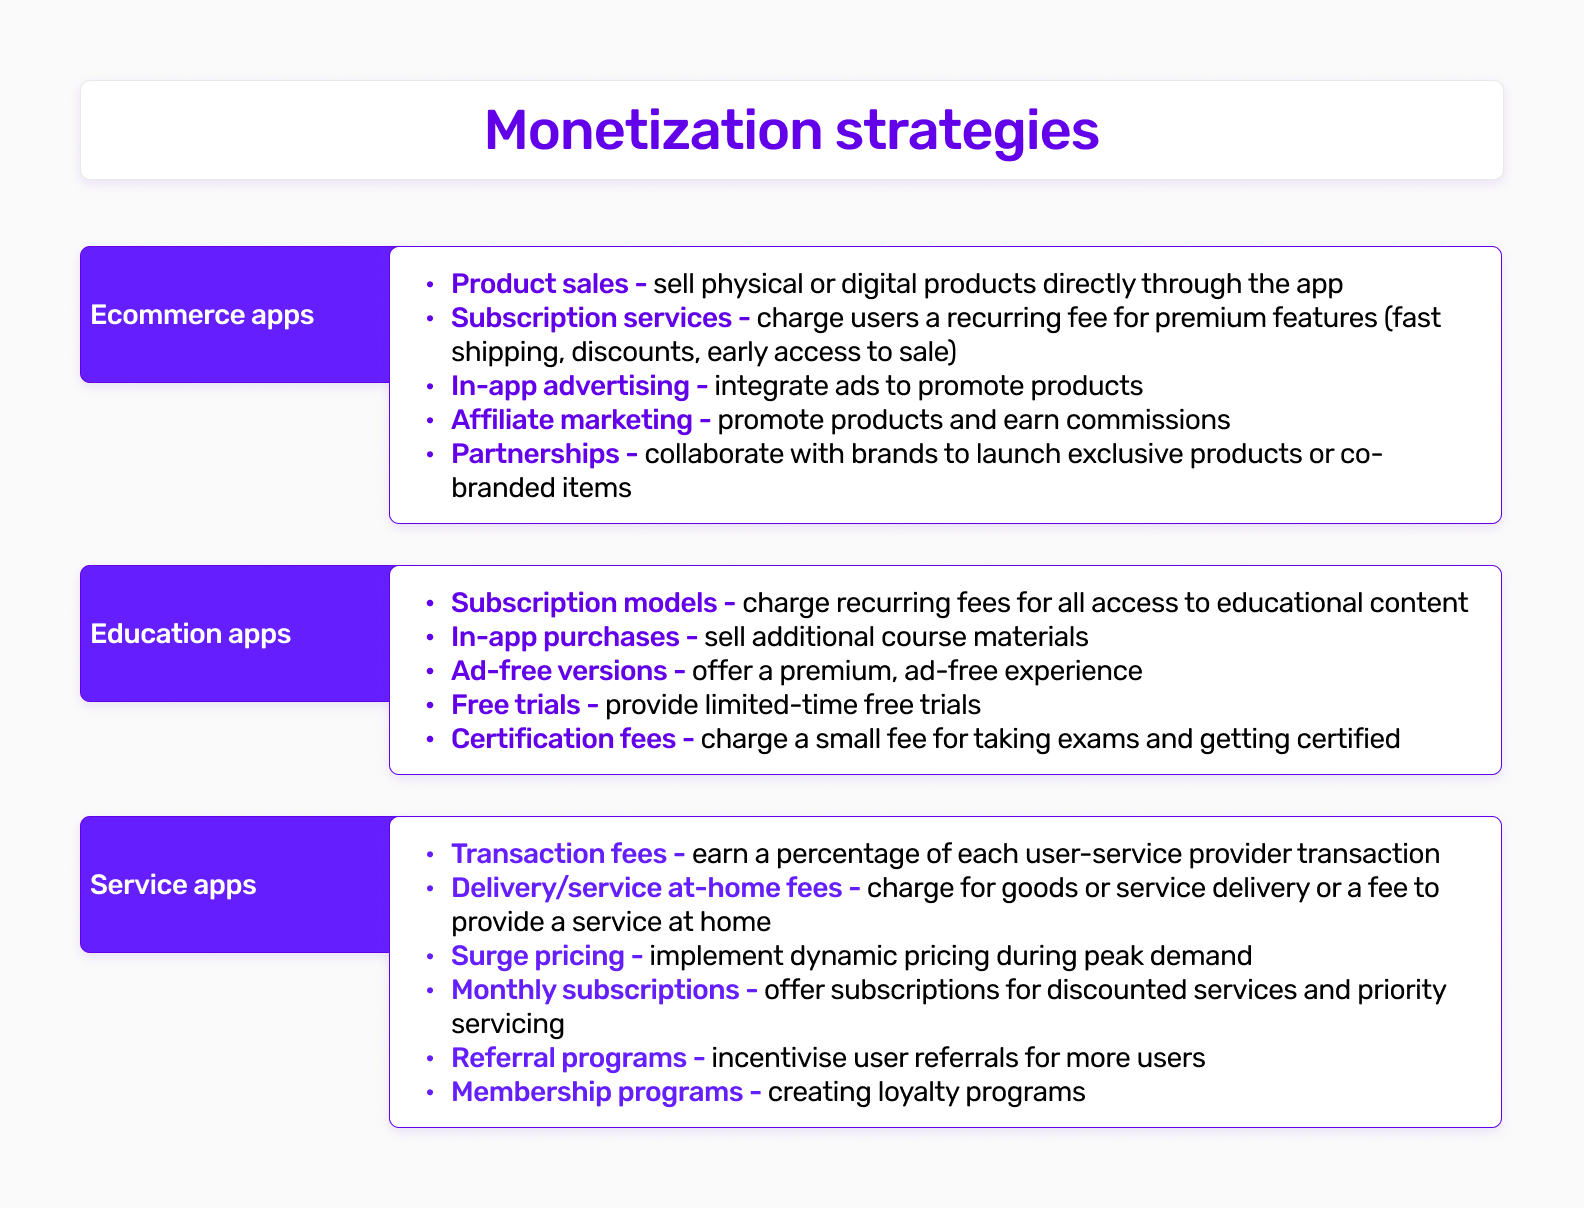 An infographic on app monetisation strategies for ecommerce apps, educational apps and service apps